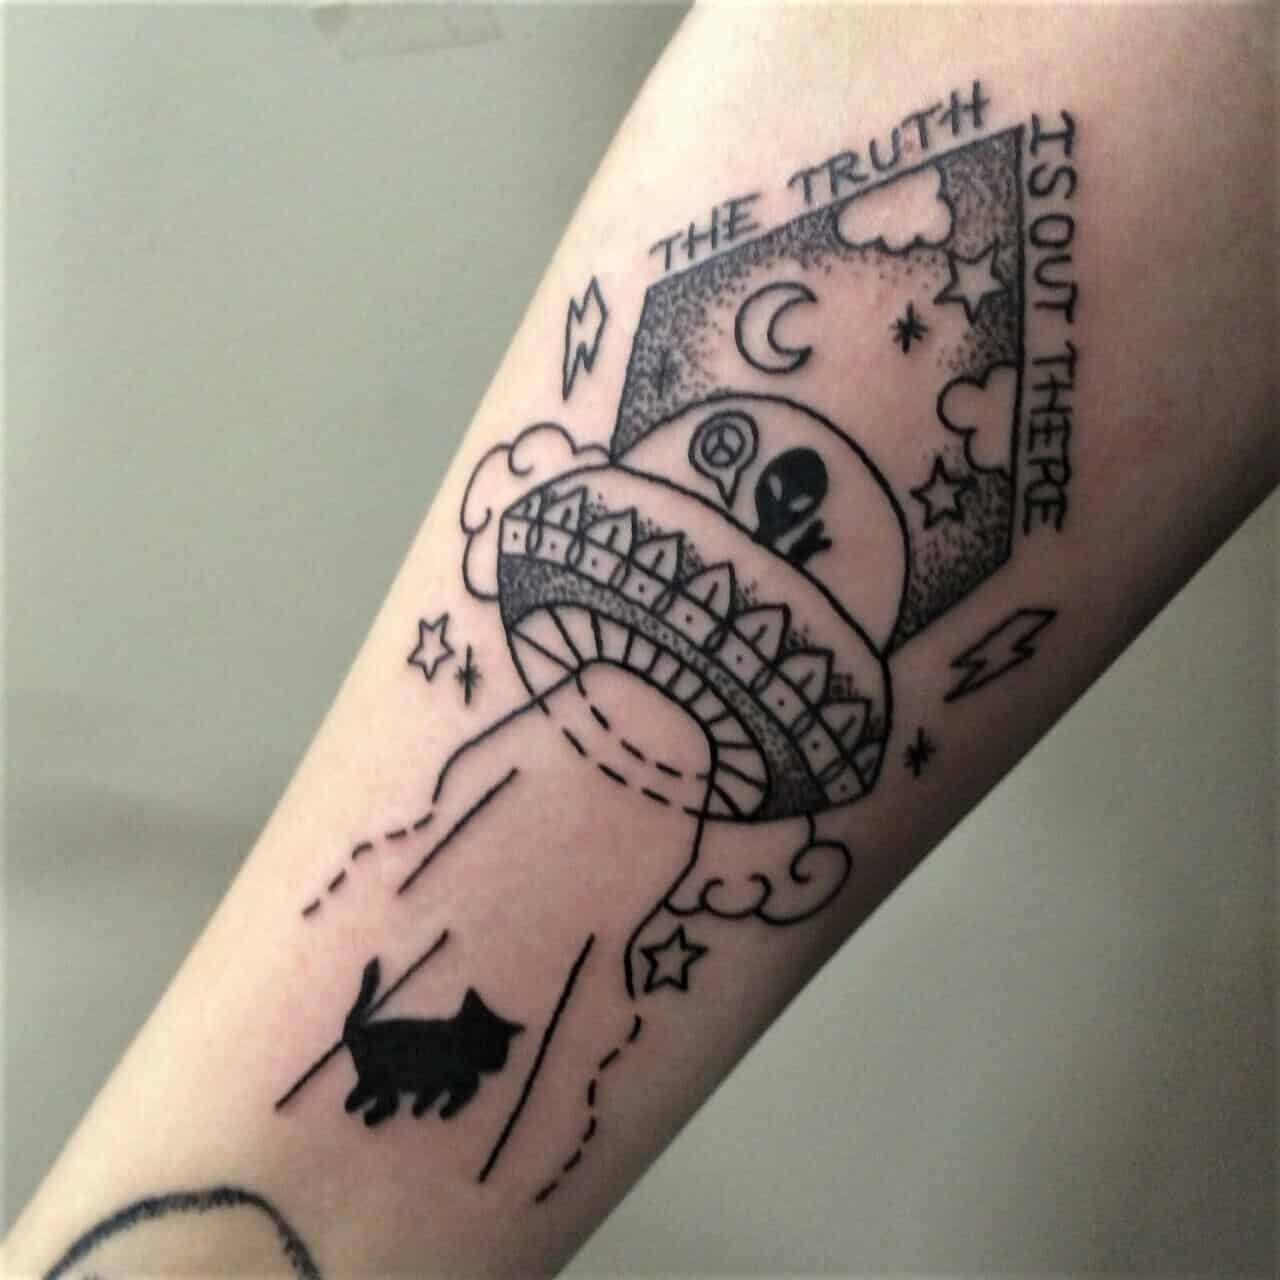 "The truth is out there" UFO arm tattoo